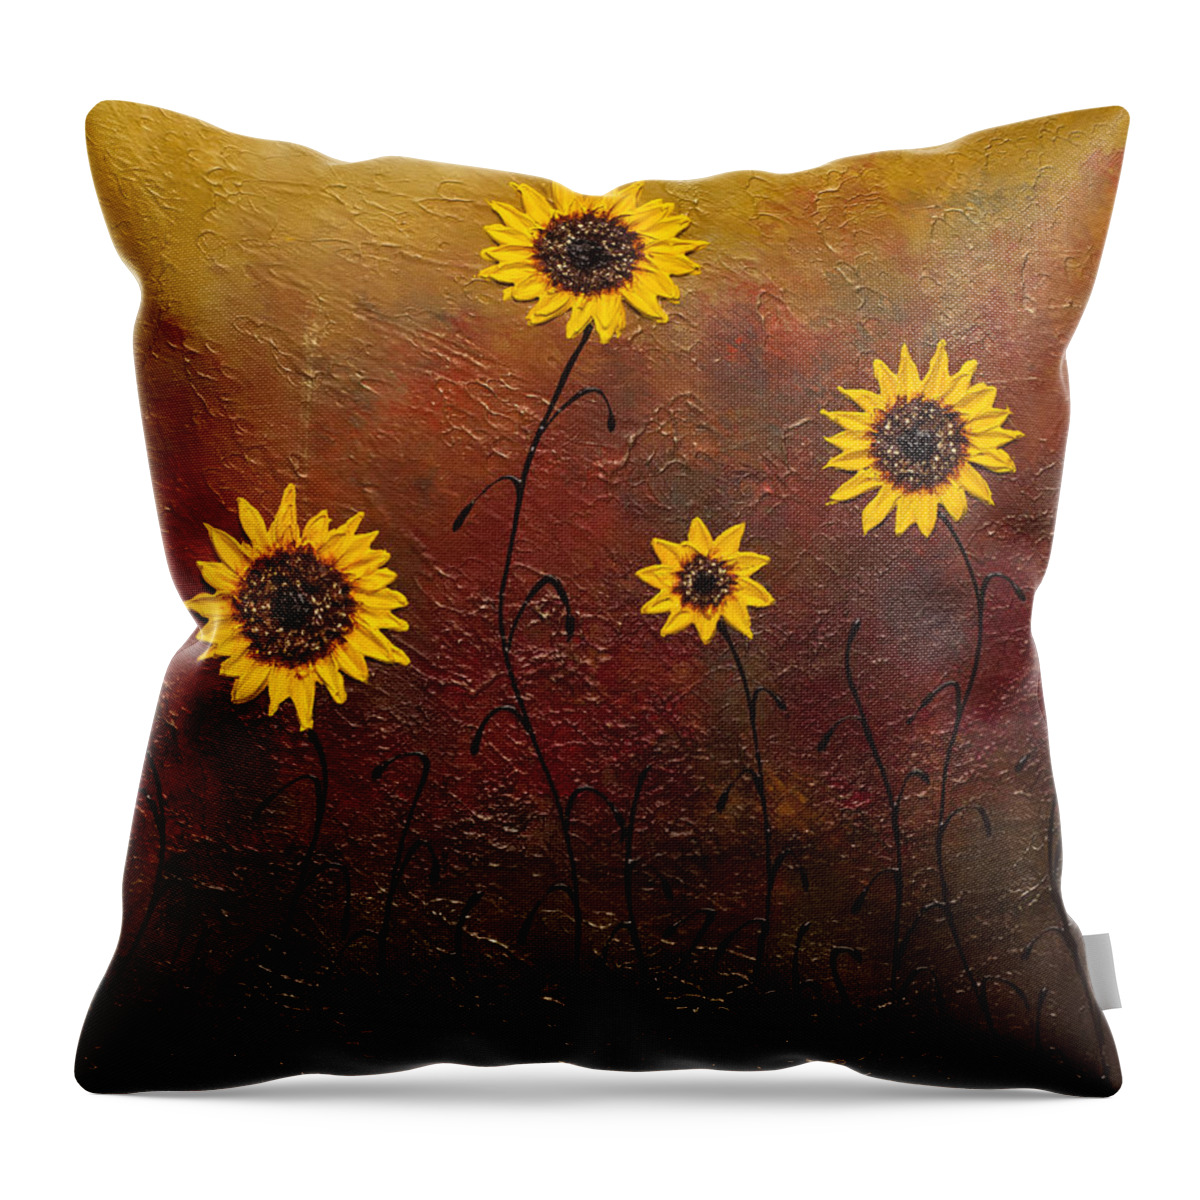 Sunflowers Throw Pillow featuring the painting Sunflowers 3 by Carmen Guedez